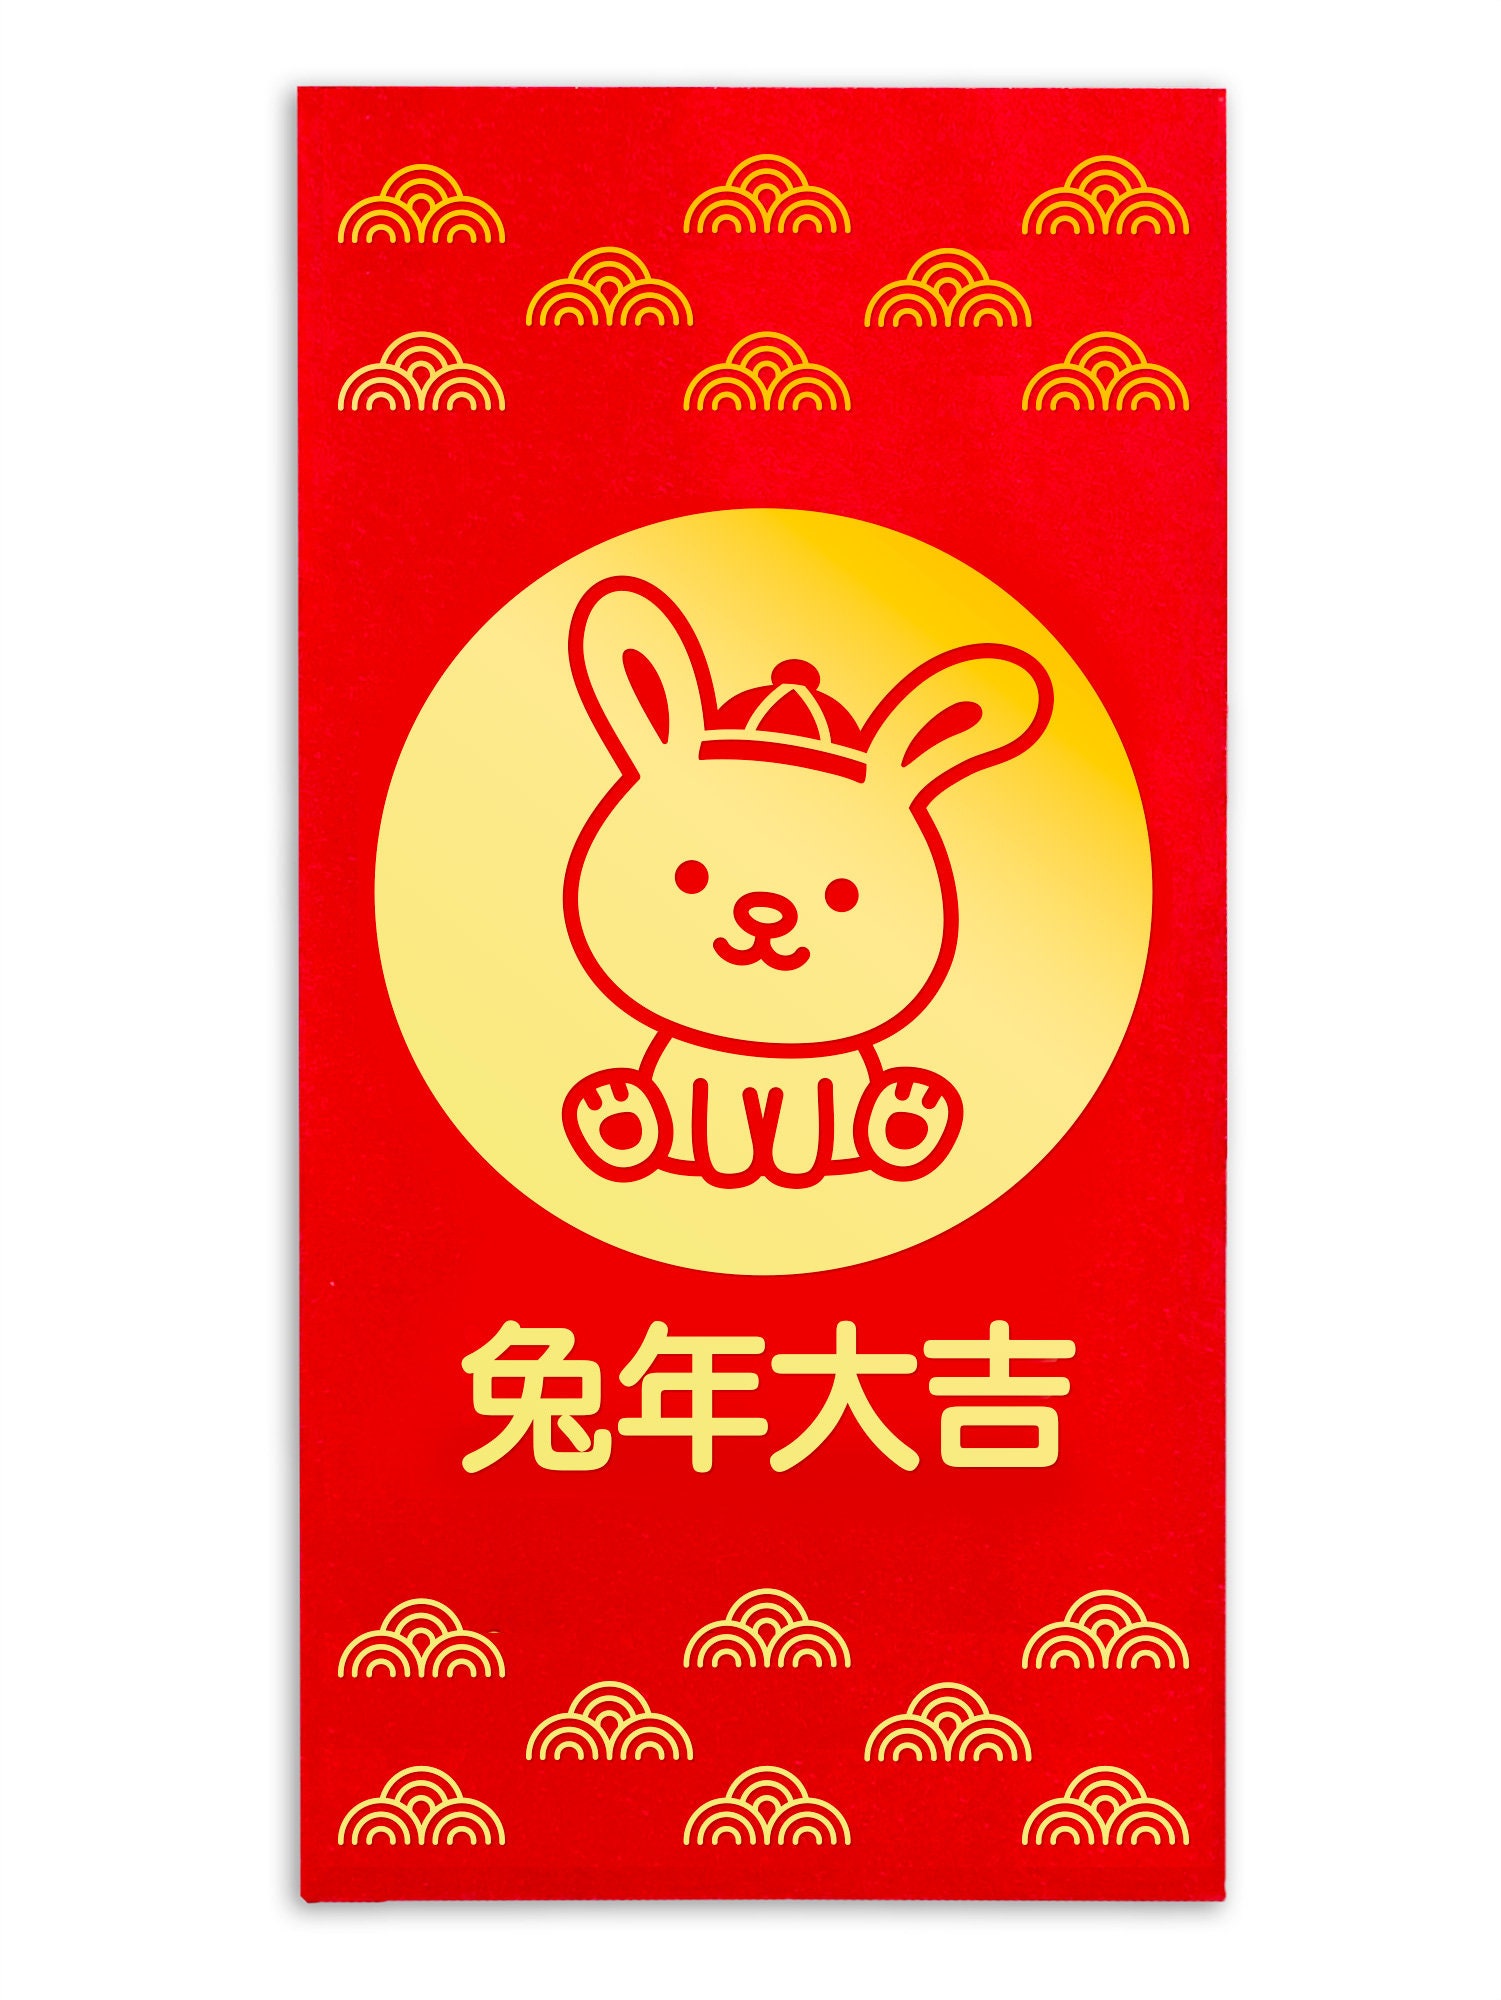 Red Envelope Year of Rabbit (5 Packs) – Lao Feng Xiang Jewelry